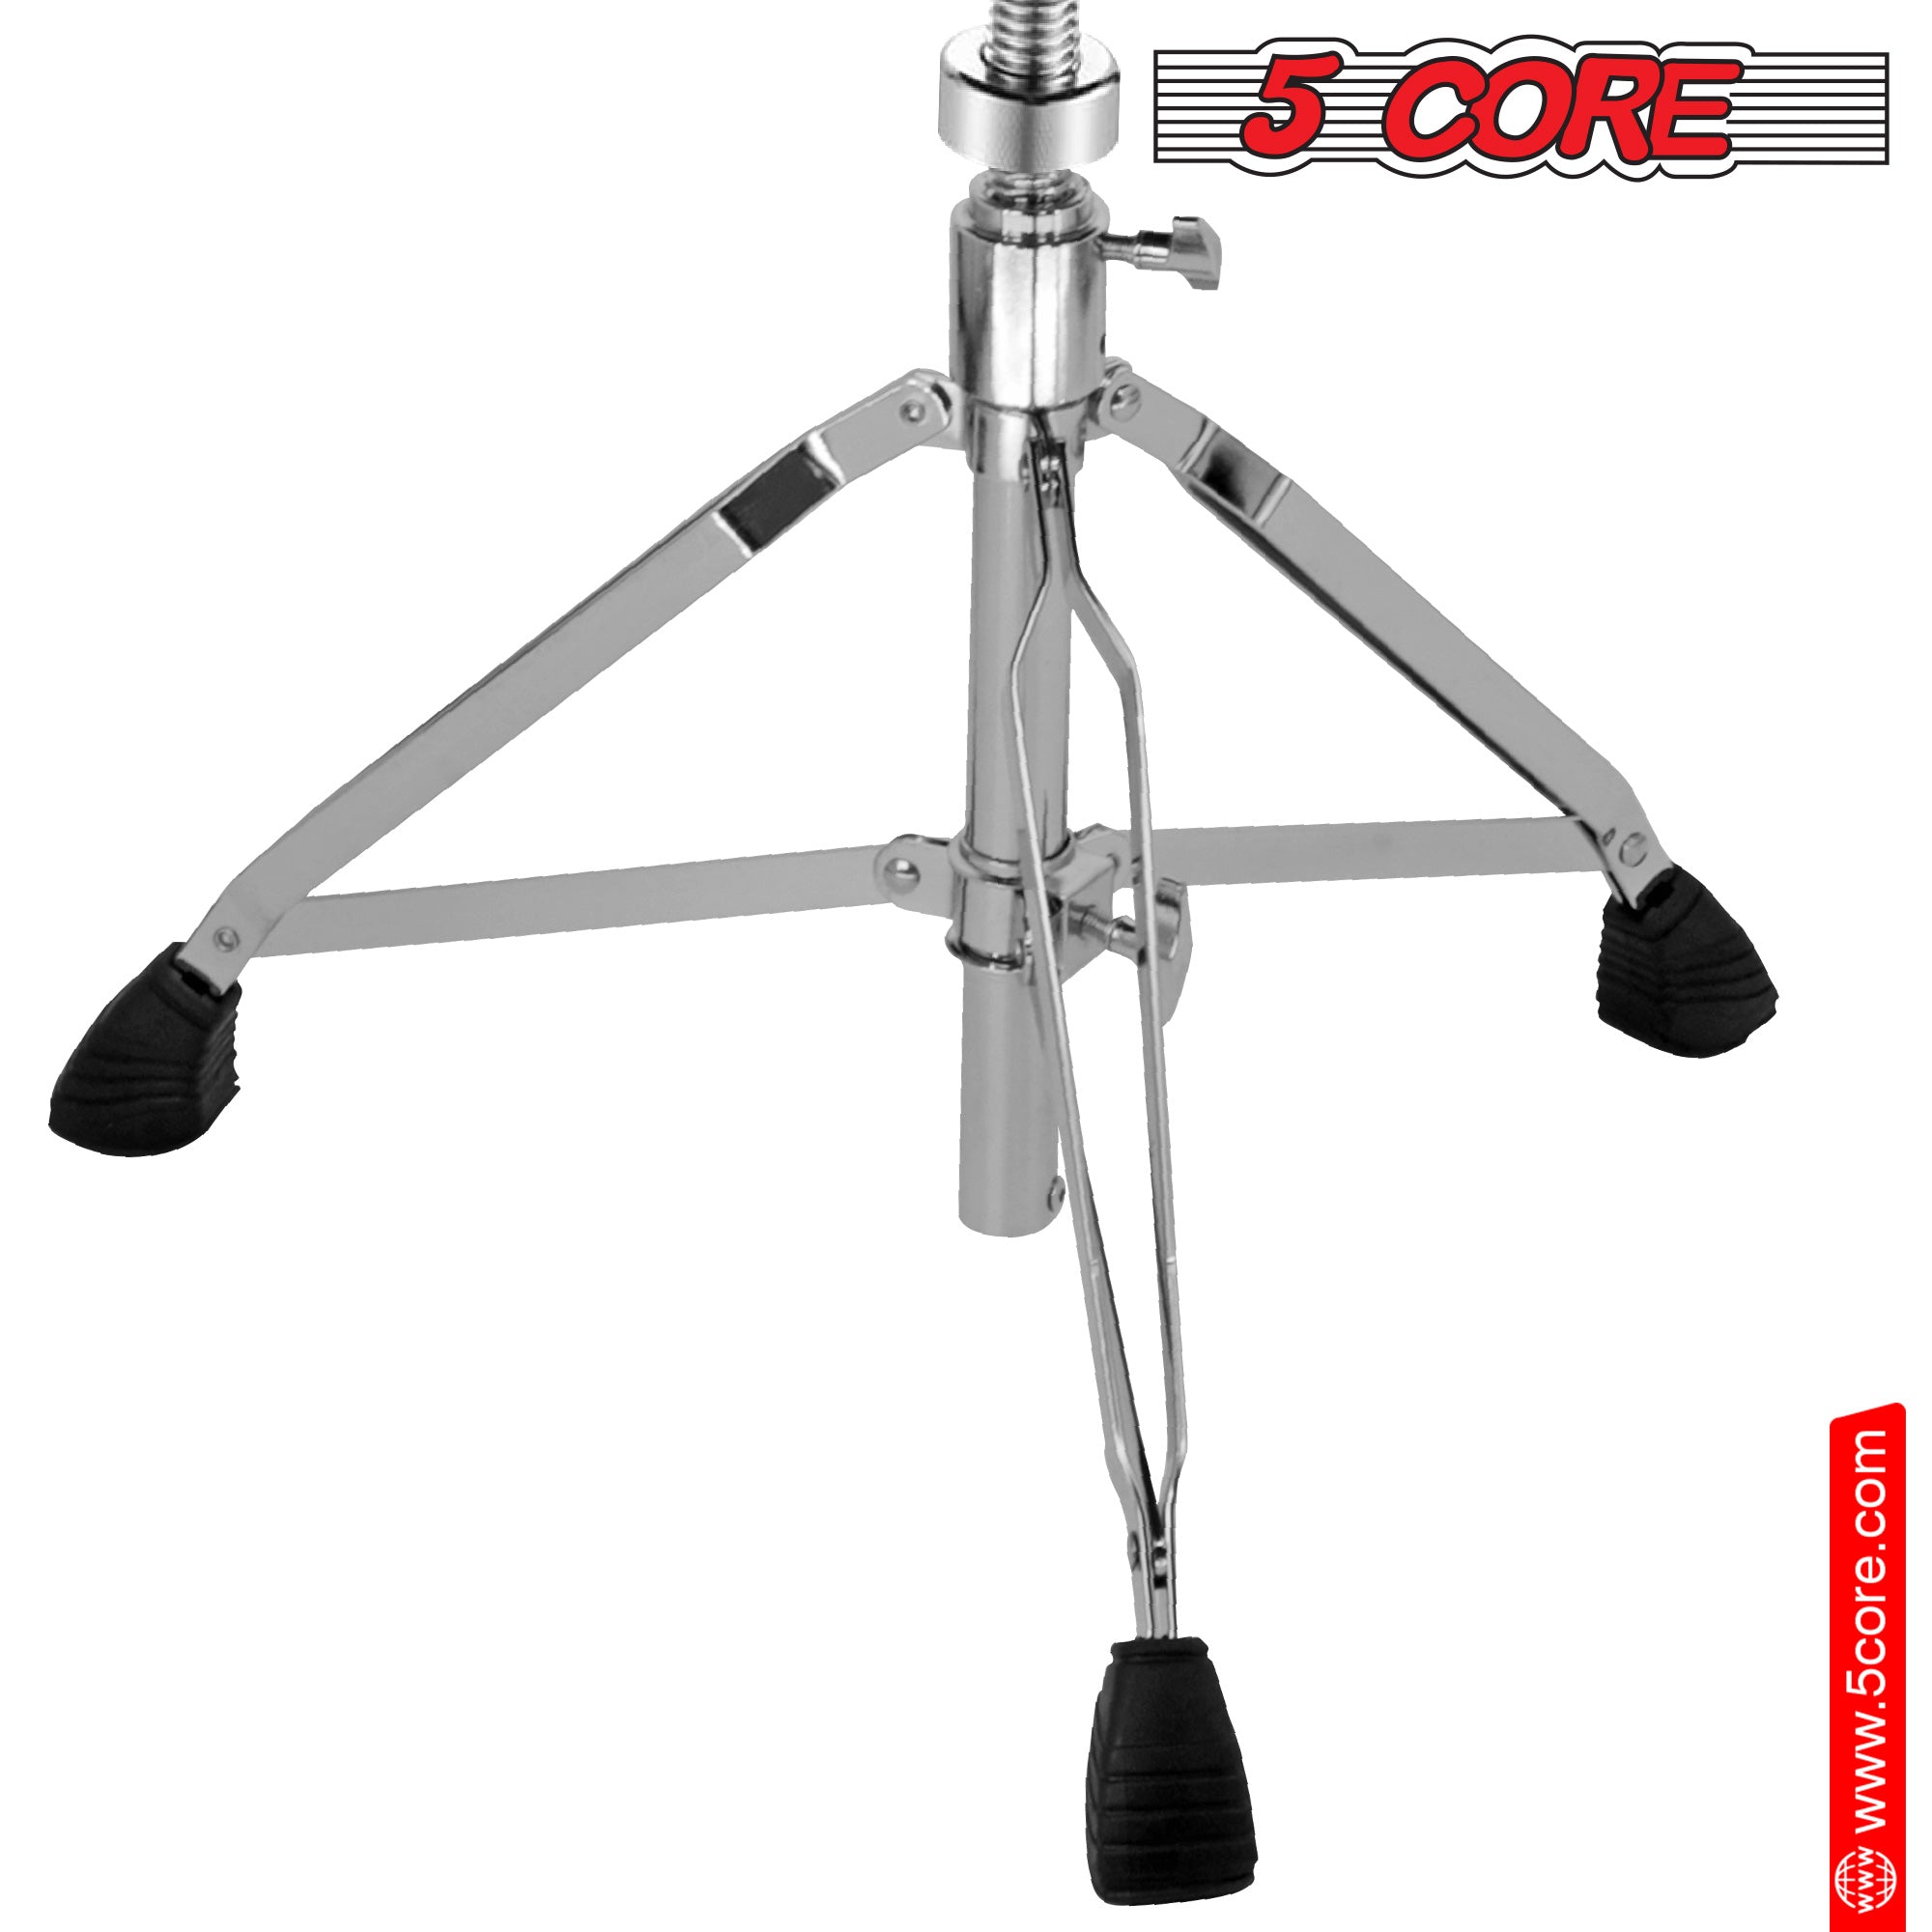 Drum throne has Durable steel legs ensure long-lasting reliability for your musical sessions.